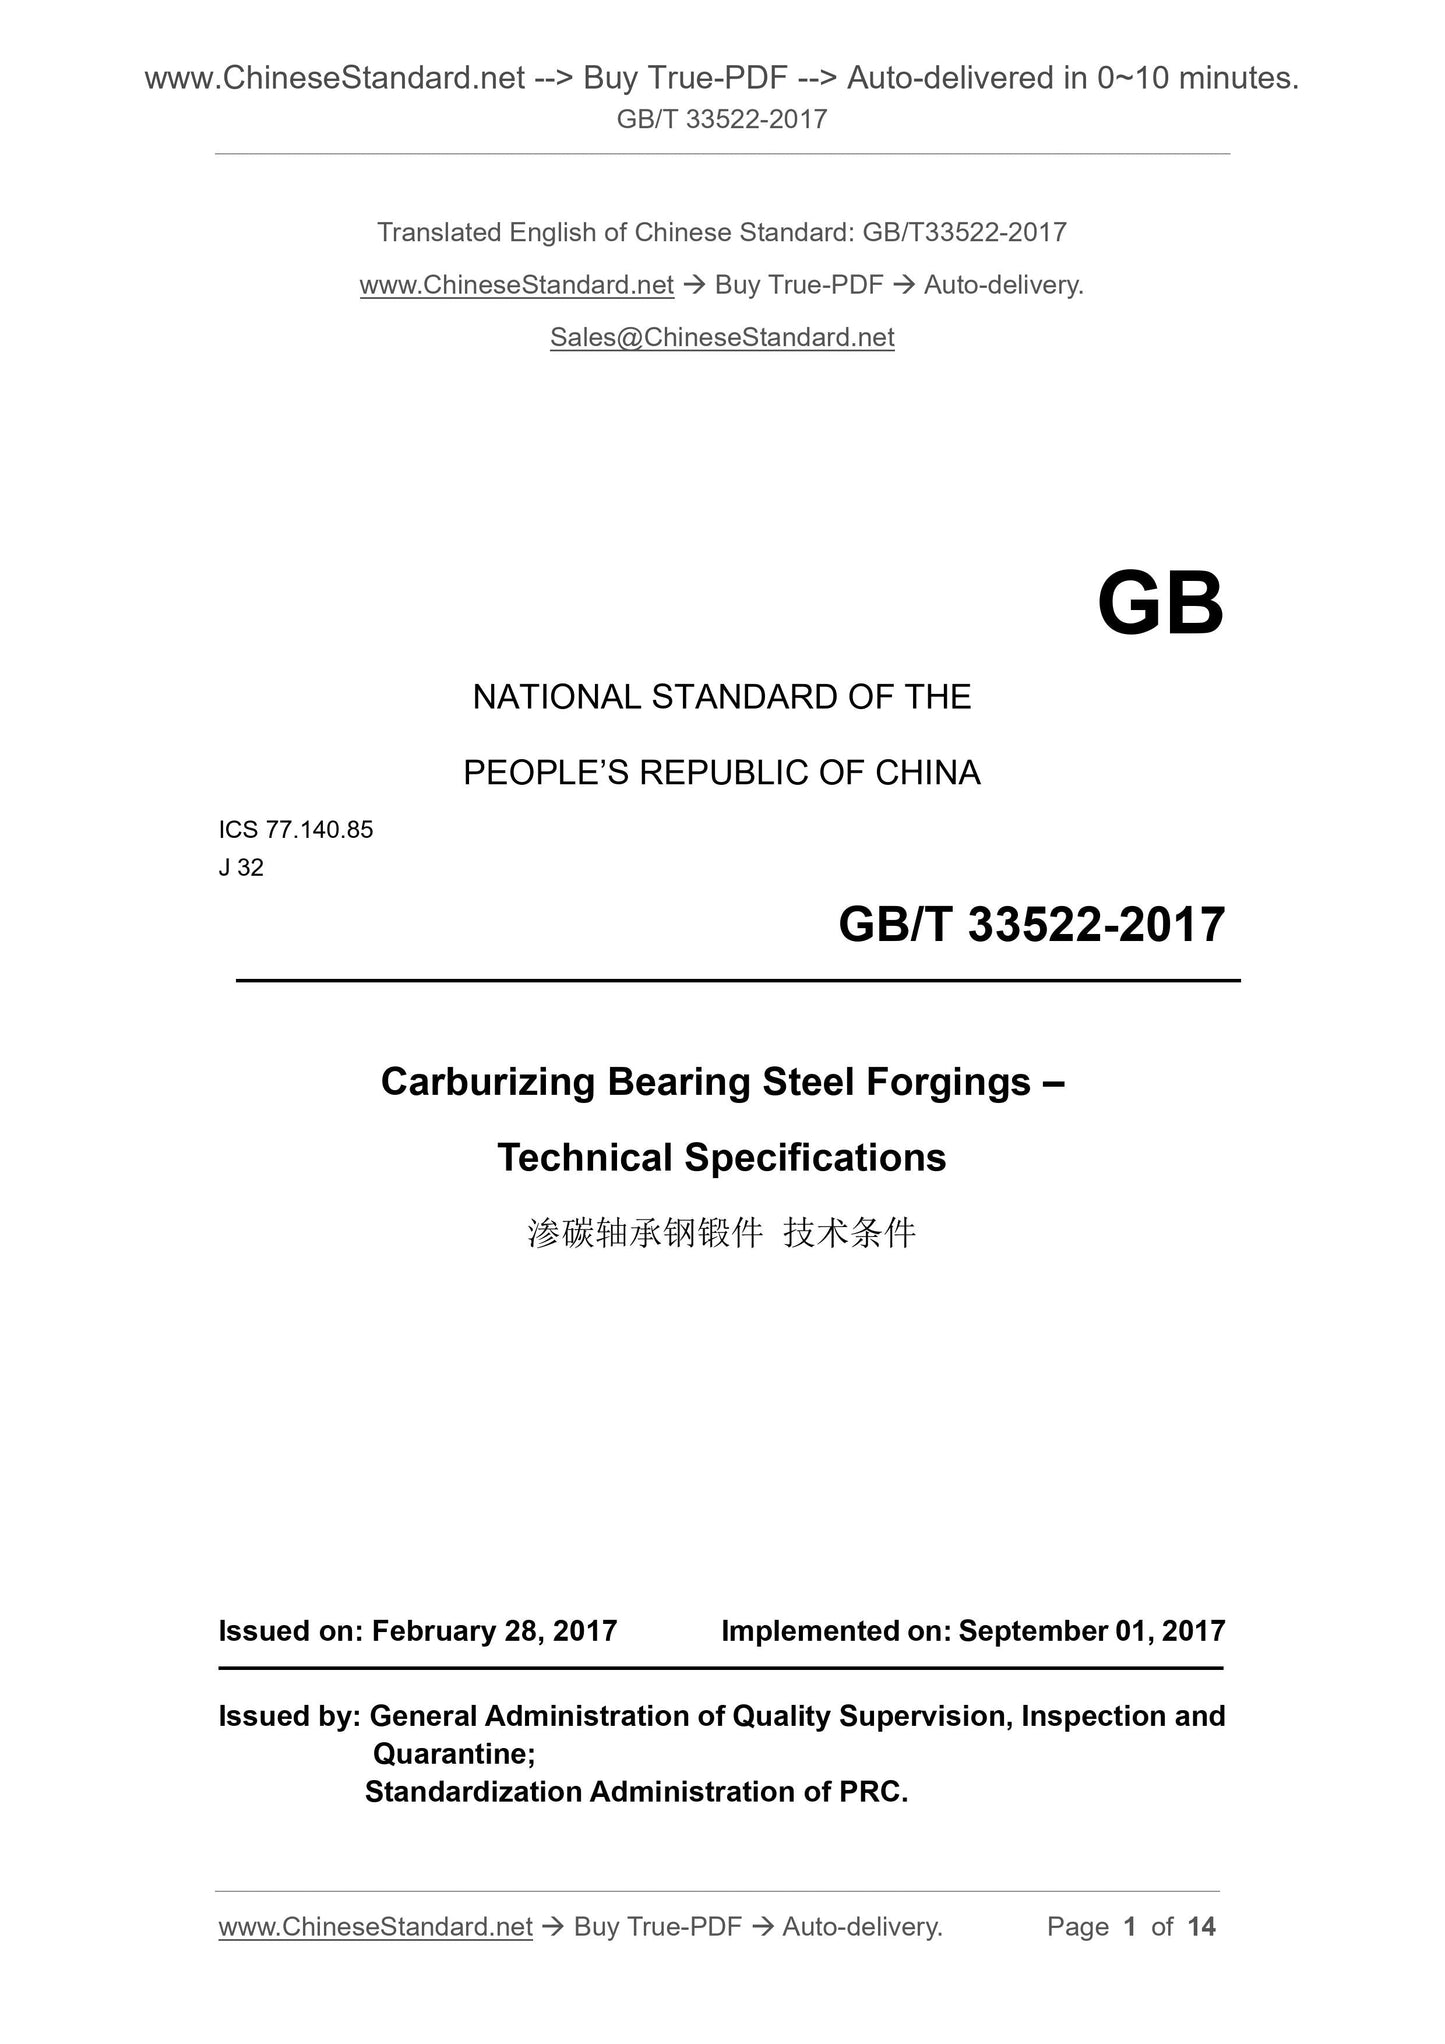 GB/T 33522-2017 Page 1